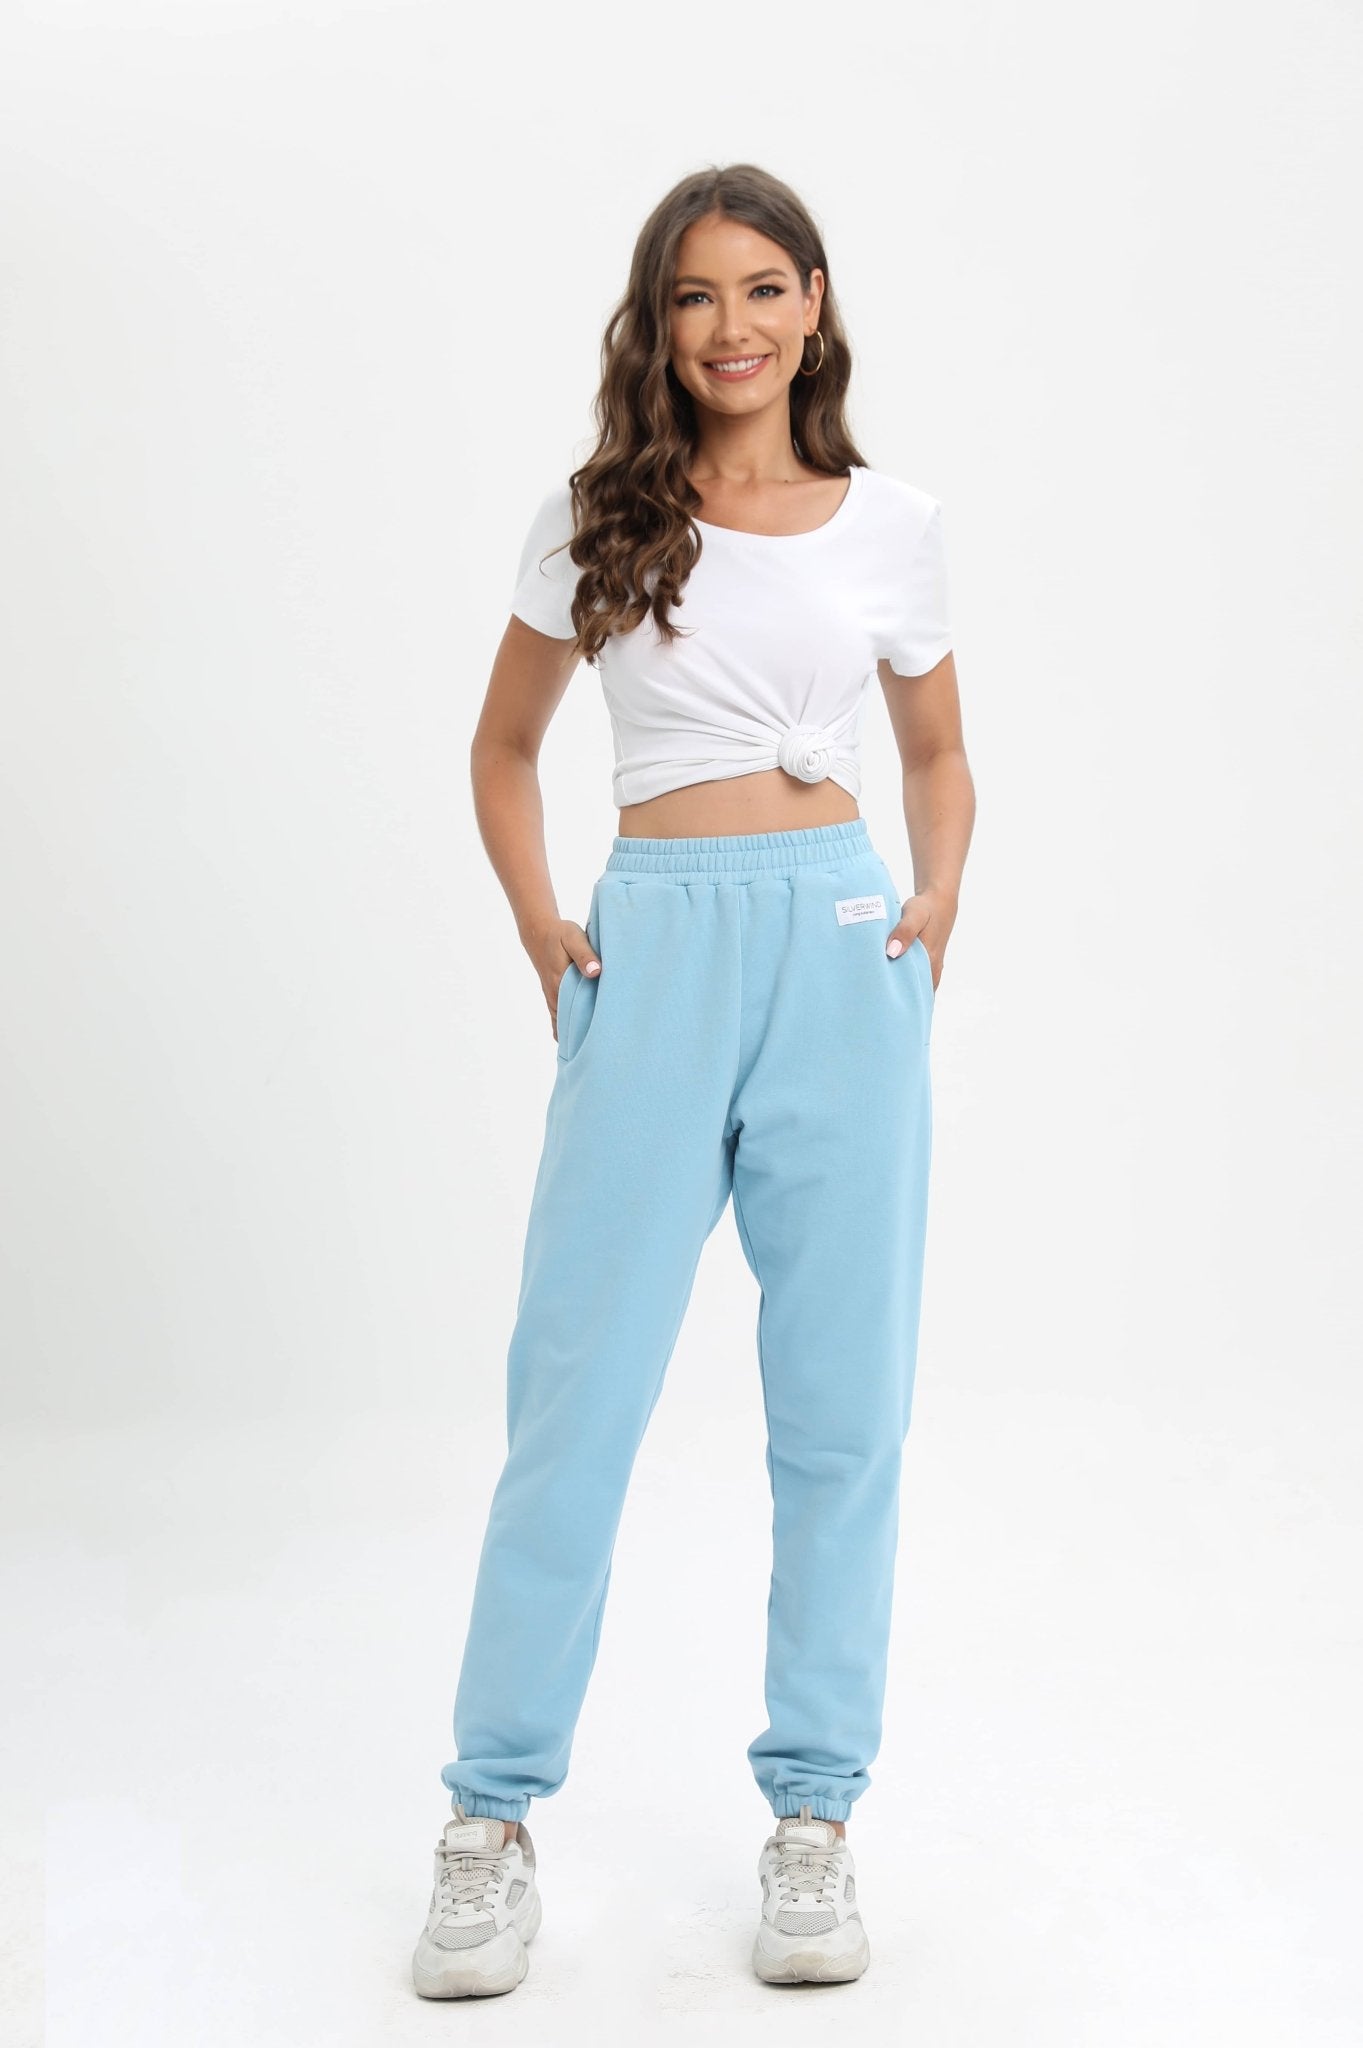 Relaxed Pocket Jogger - Calm Blue - MYSILVERWIND